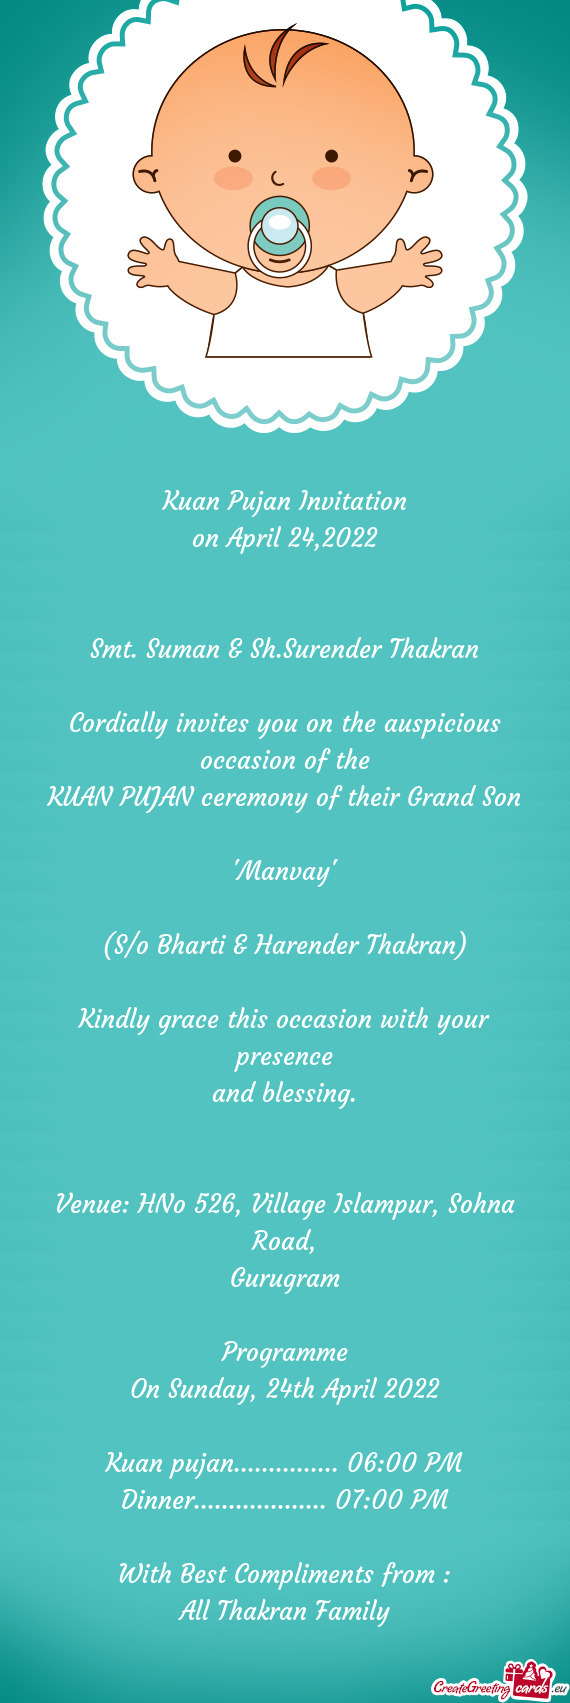 Cordially invites you on the auspicious occasion of the